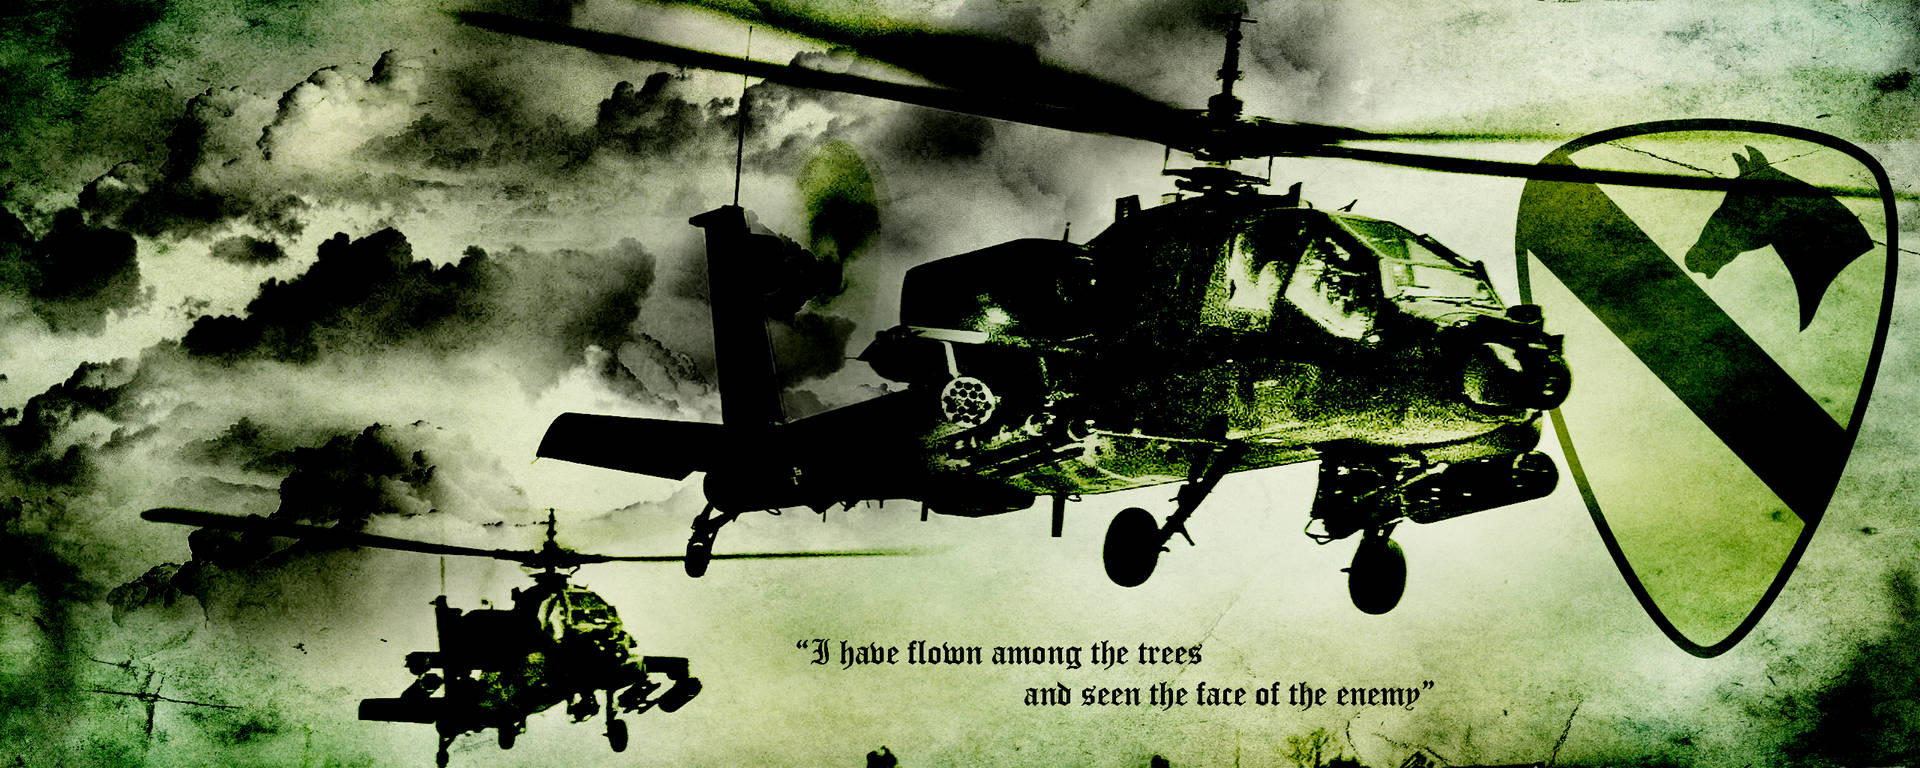 Quote About Attack Helicopter 4k Wallpaper